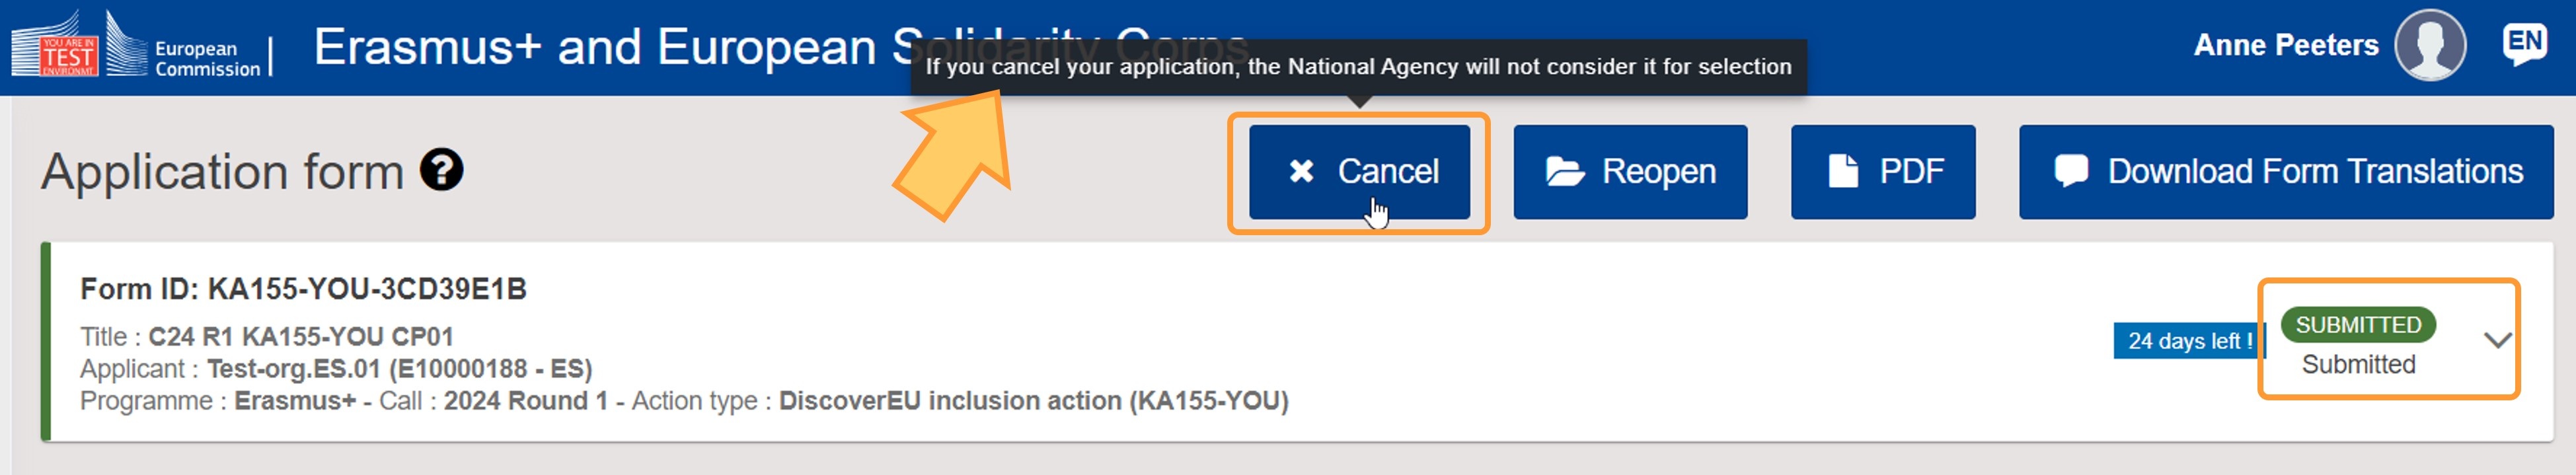 Cancel button in a submitted application